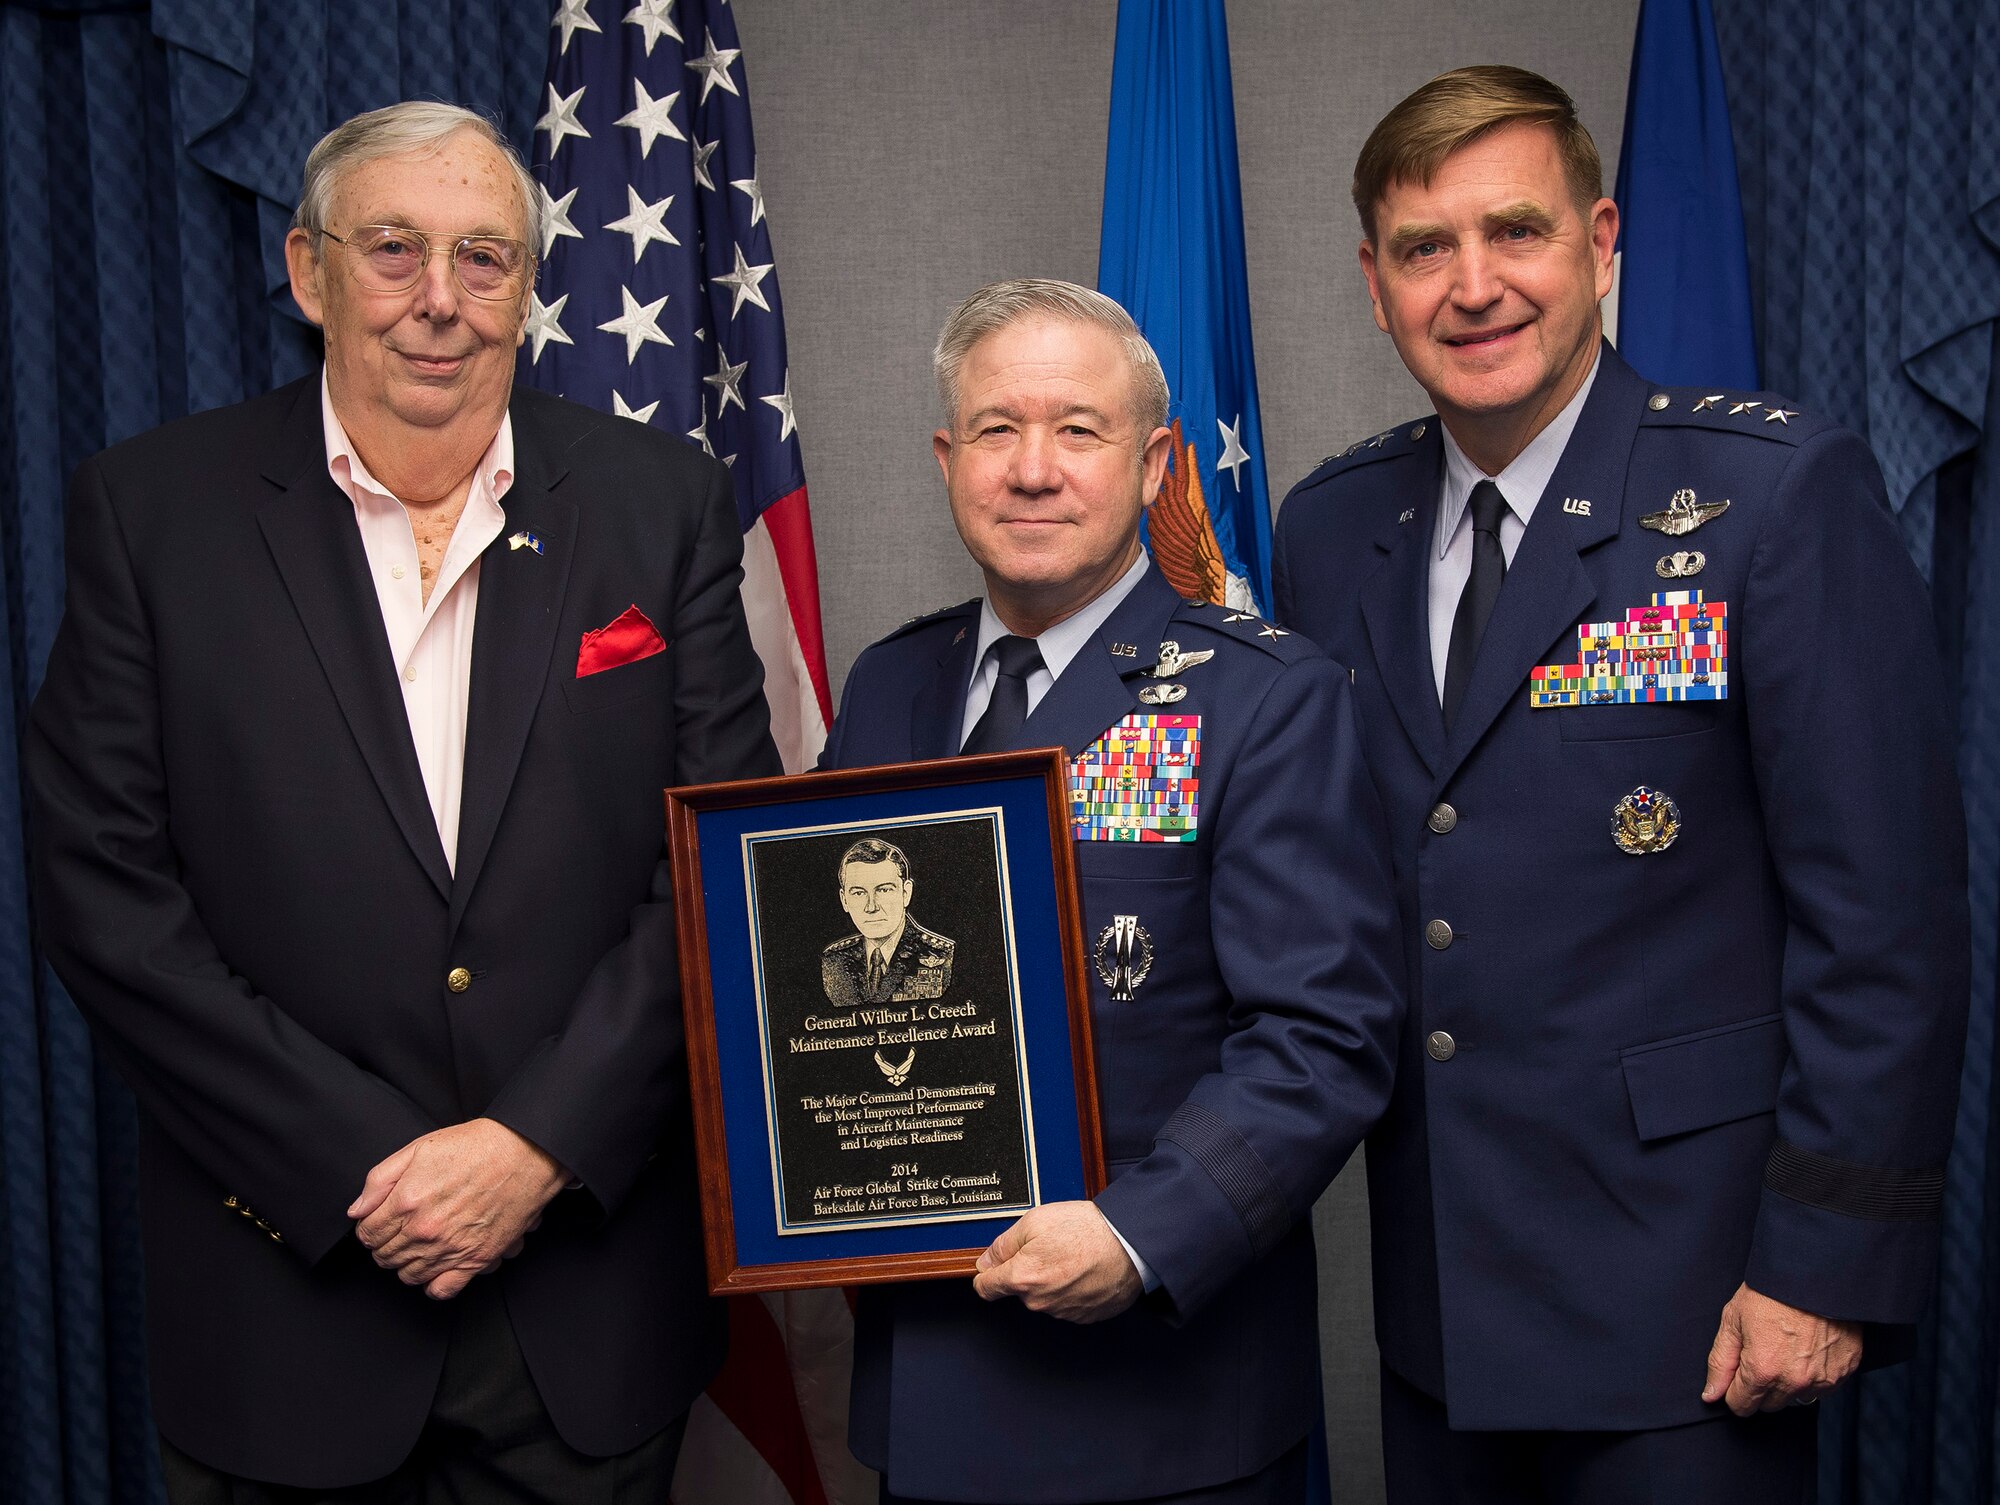 Air Force Assistant Vice Chief of Staff Lt. Gen. Stephen Hoog (right) presents the Gen. Wilber L. Creech Maintenance Excellence Award to Maj. Gen. Keith Kries (center) on behalf of Air Force Global Strike Command, during a ceremony in the Pentagon, Washington, D.C., April 28, 2015. The award recognizes the major command demonstrating the most improved performance in aircraft maintenance and logistics readiness in a given fiscal year. Also pictured is Dr. James G. Roche who was the 20th secretary of the Air Force. (U.S. Air Force photo/Jim Varhegyi)